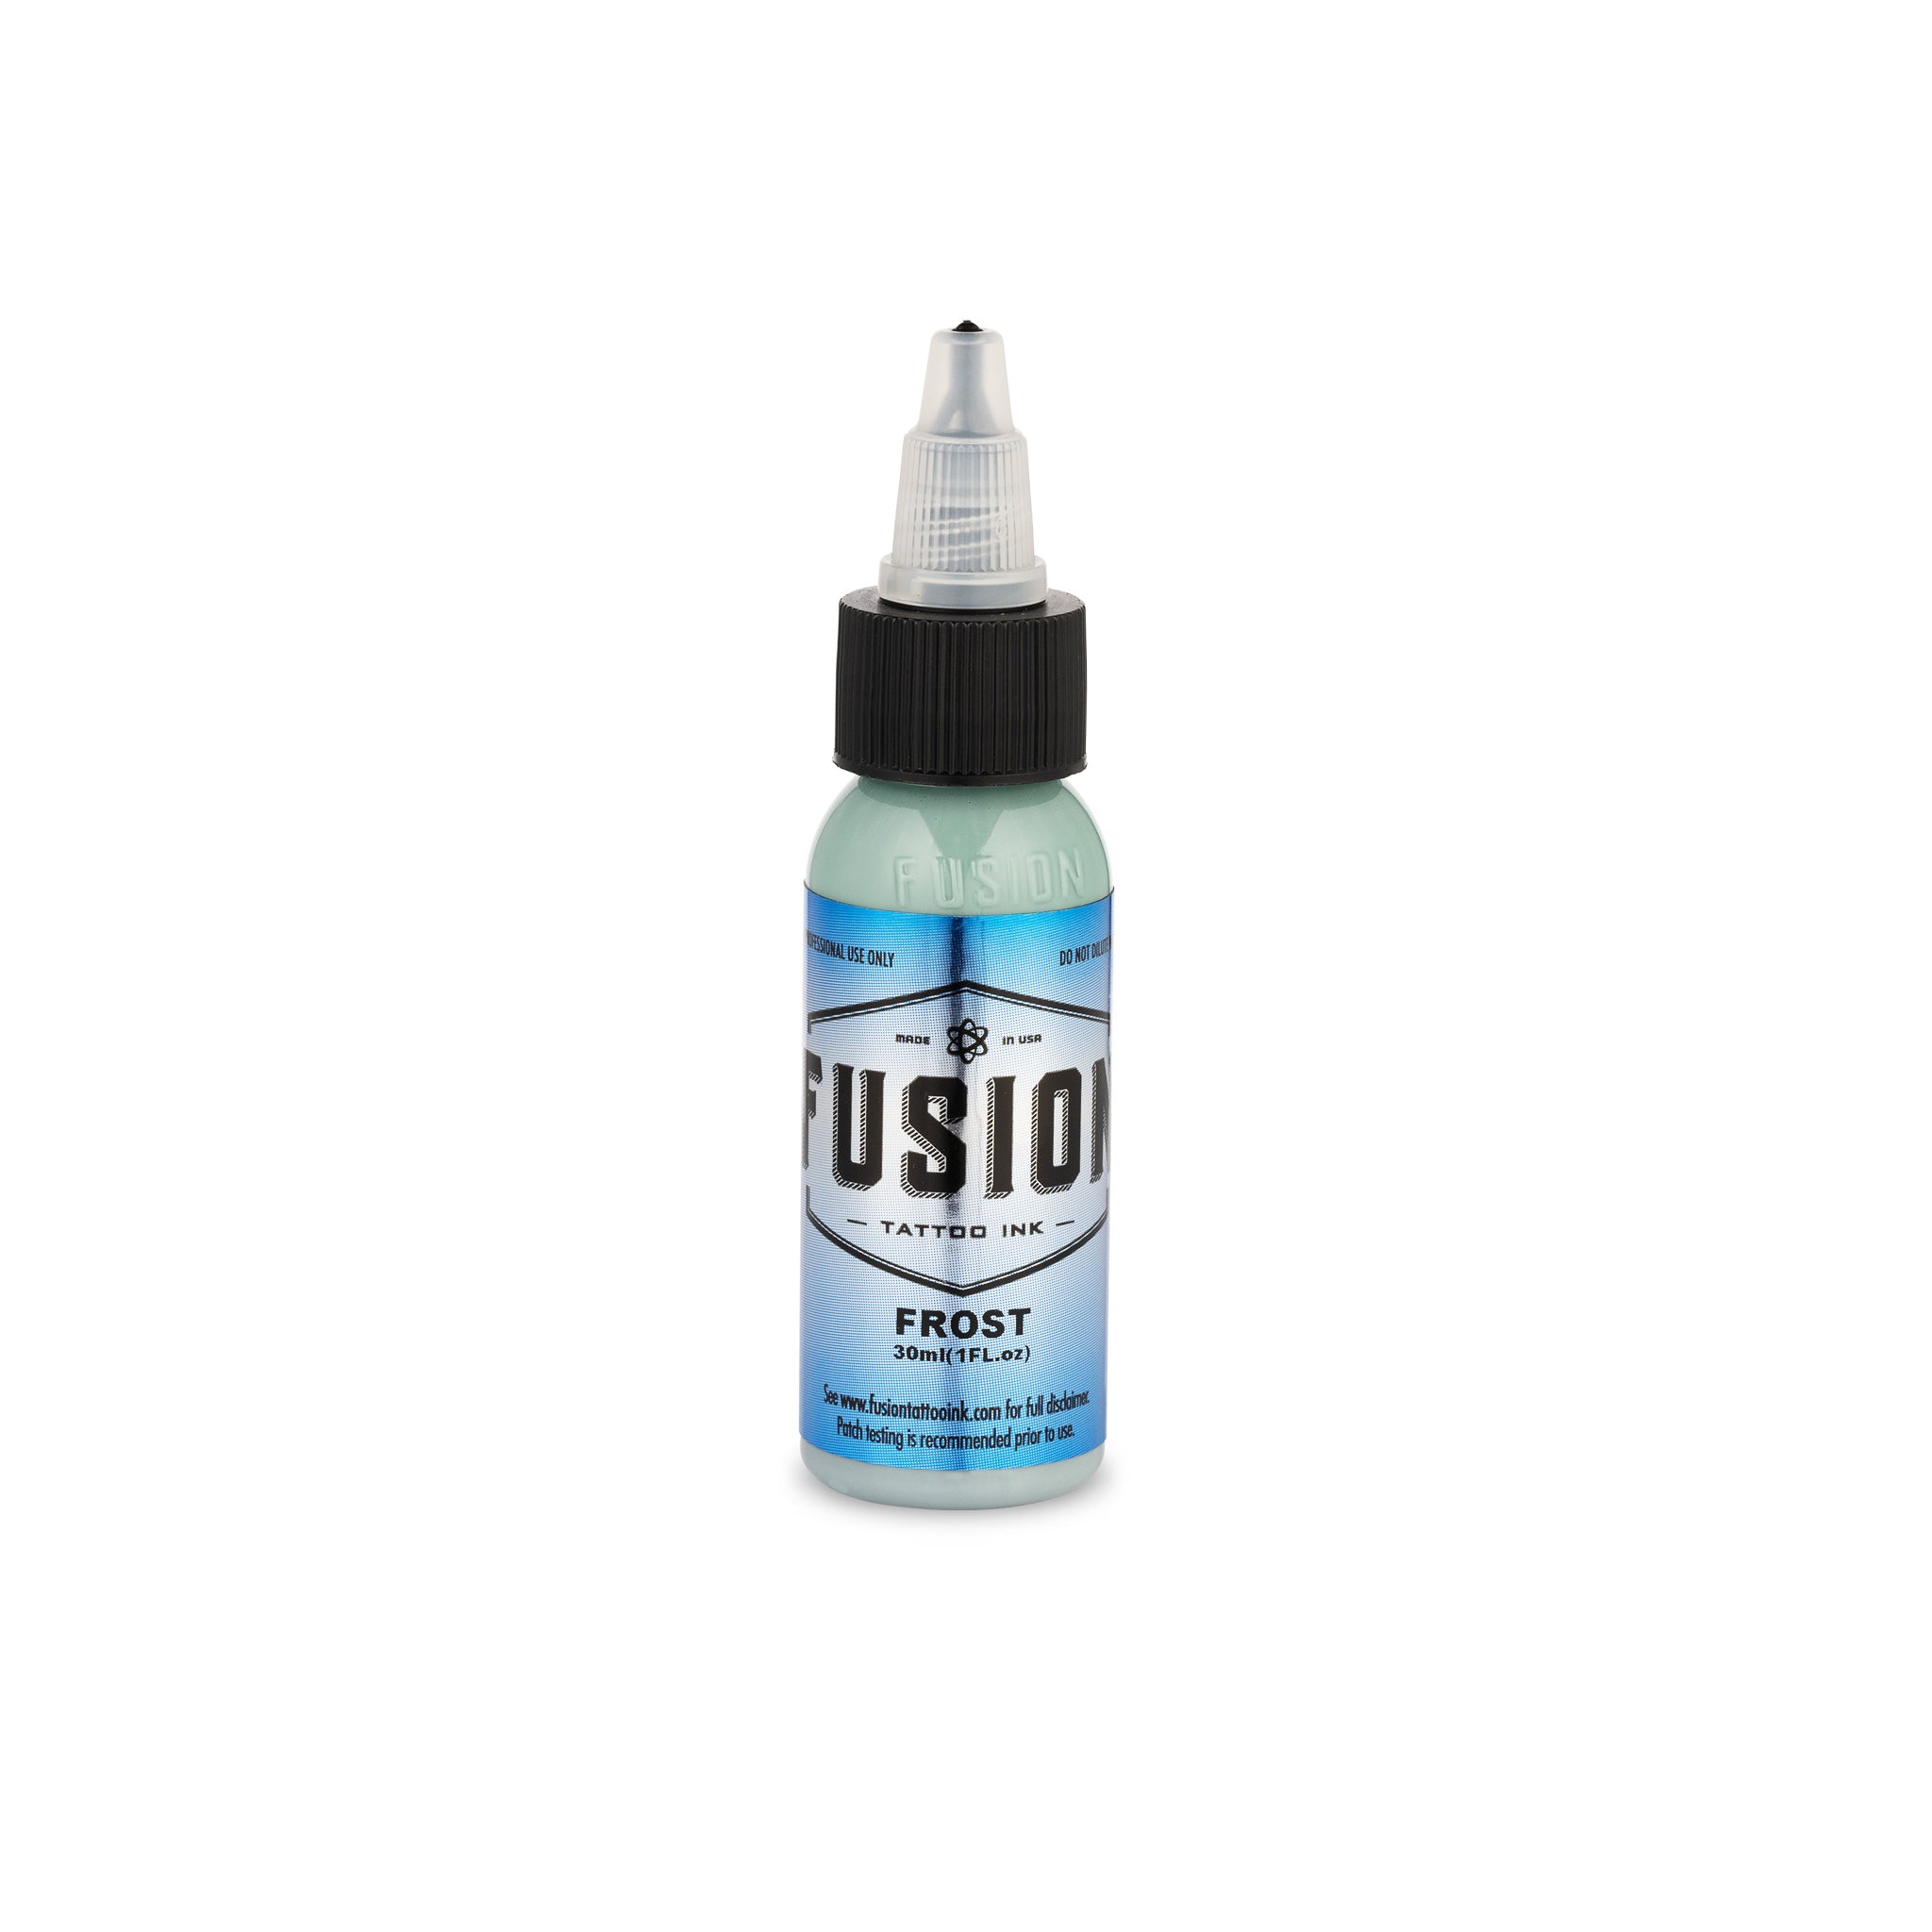 Fusion Frost Tattoo Ink 1 oz.